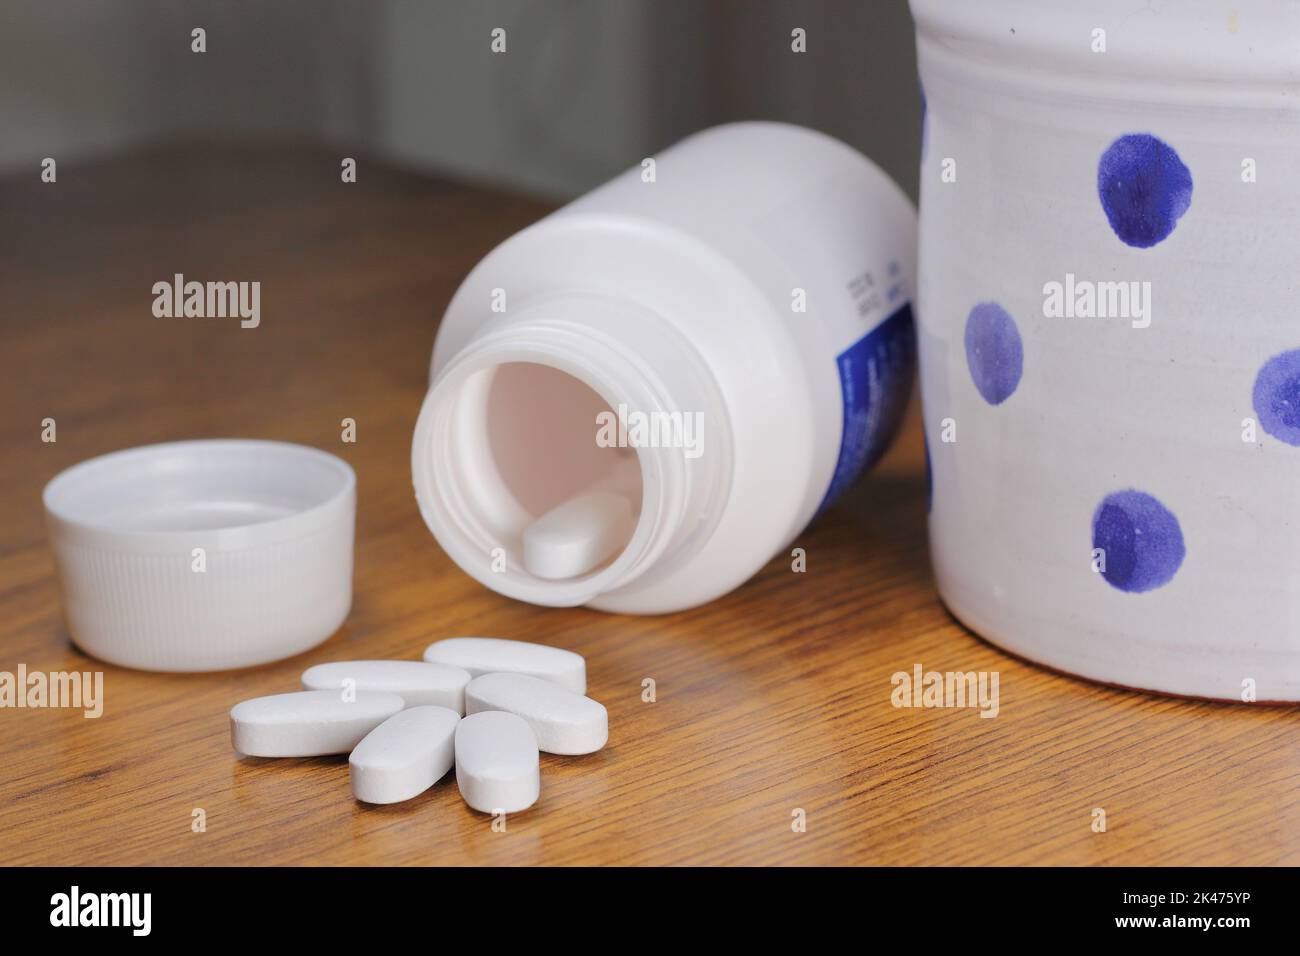 Anti-Radiation Pills, Iodine tablets, and tablets for radiation protection on the wooden table with a white medical jar and blue polka dot mug Stock Photo